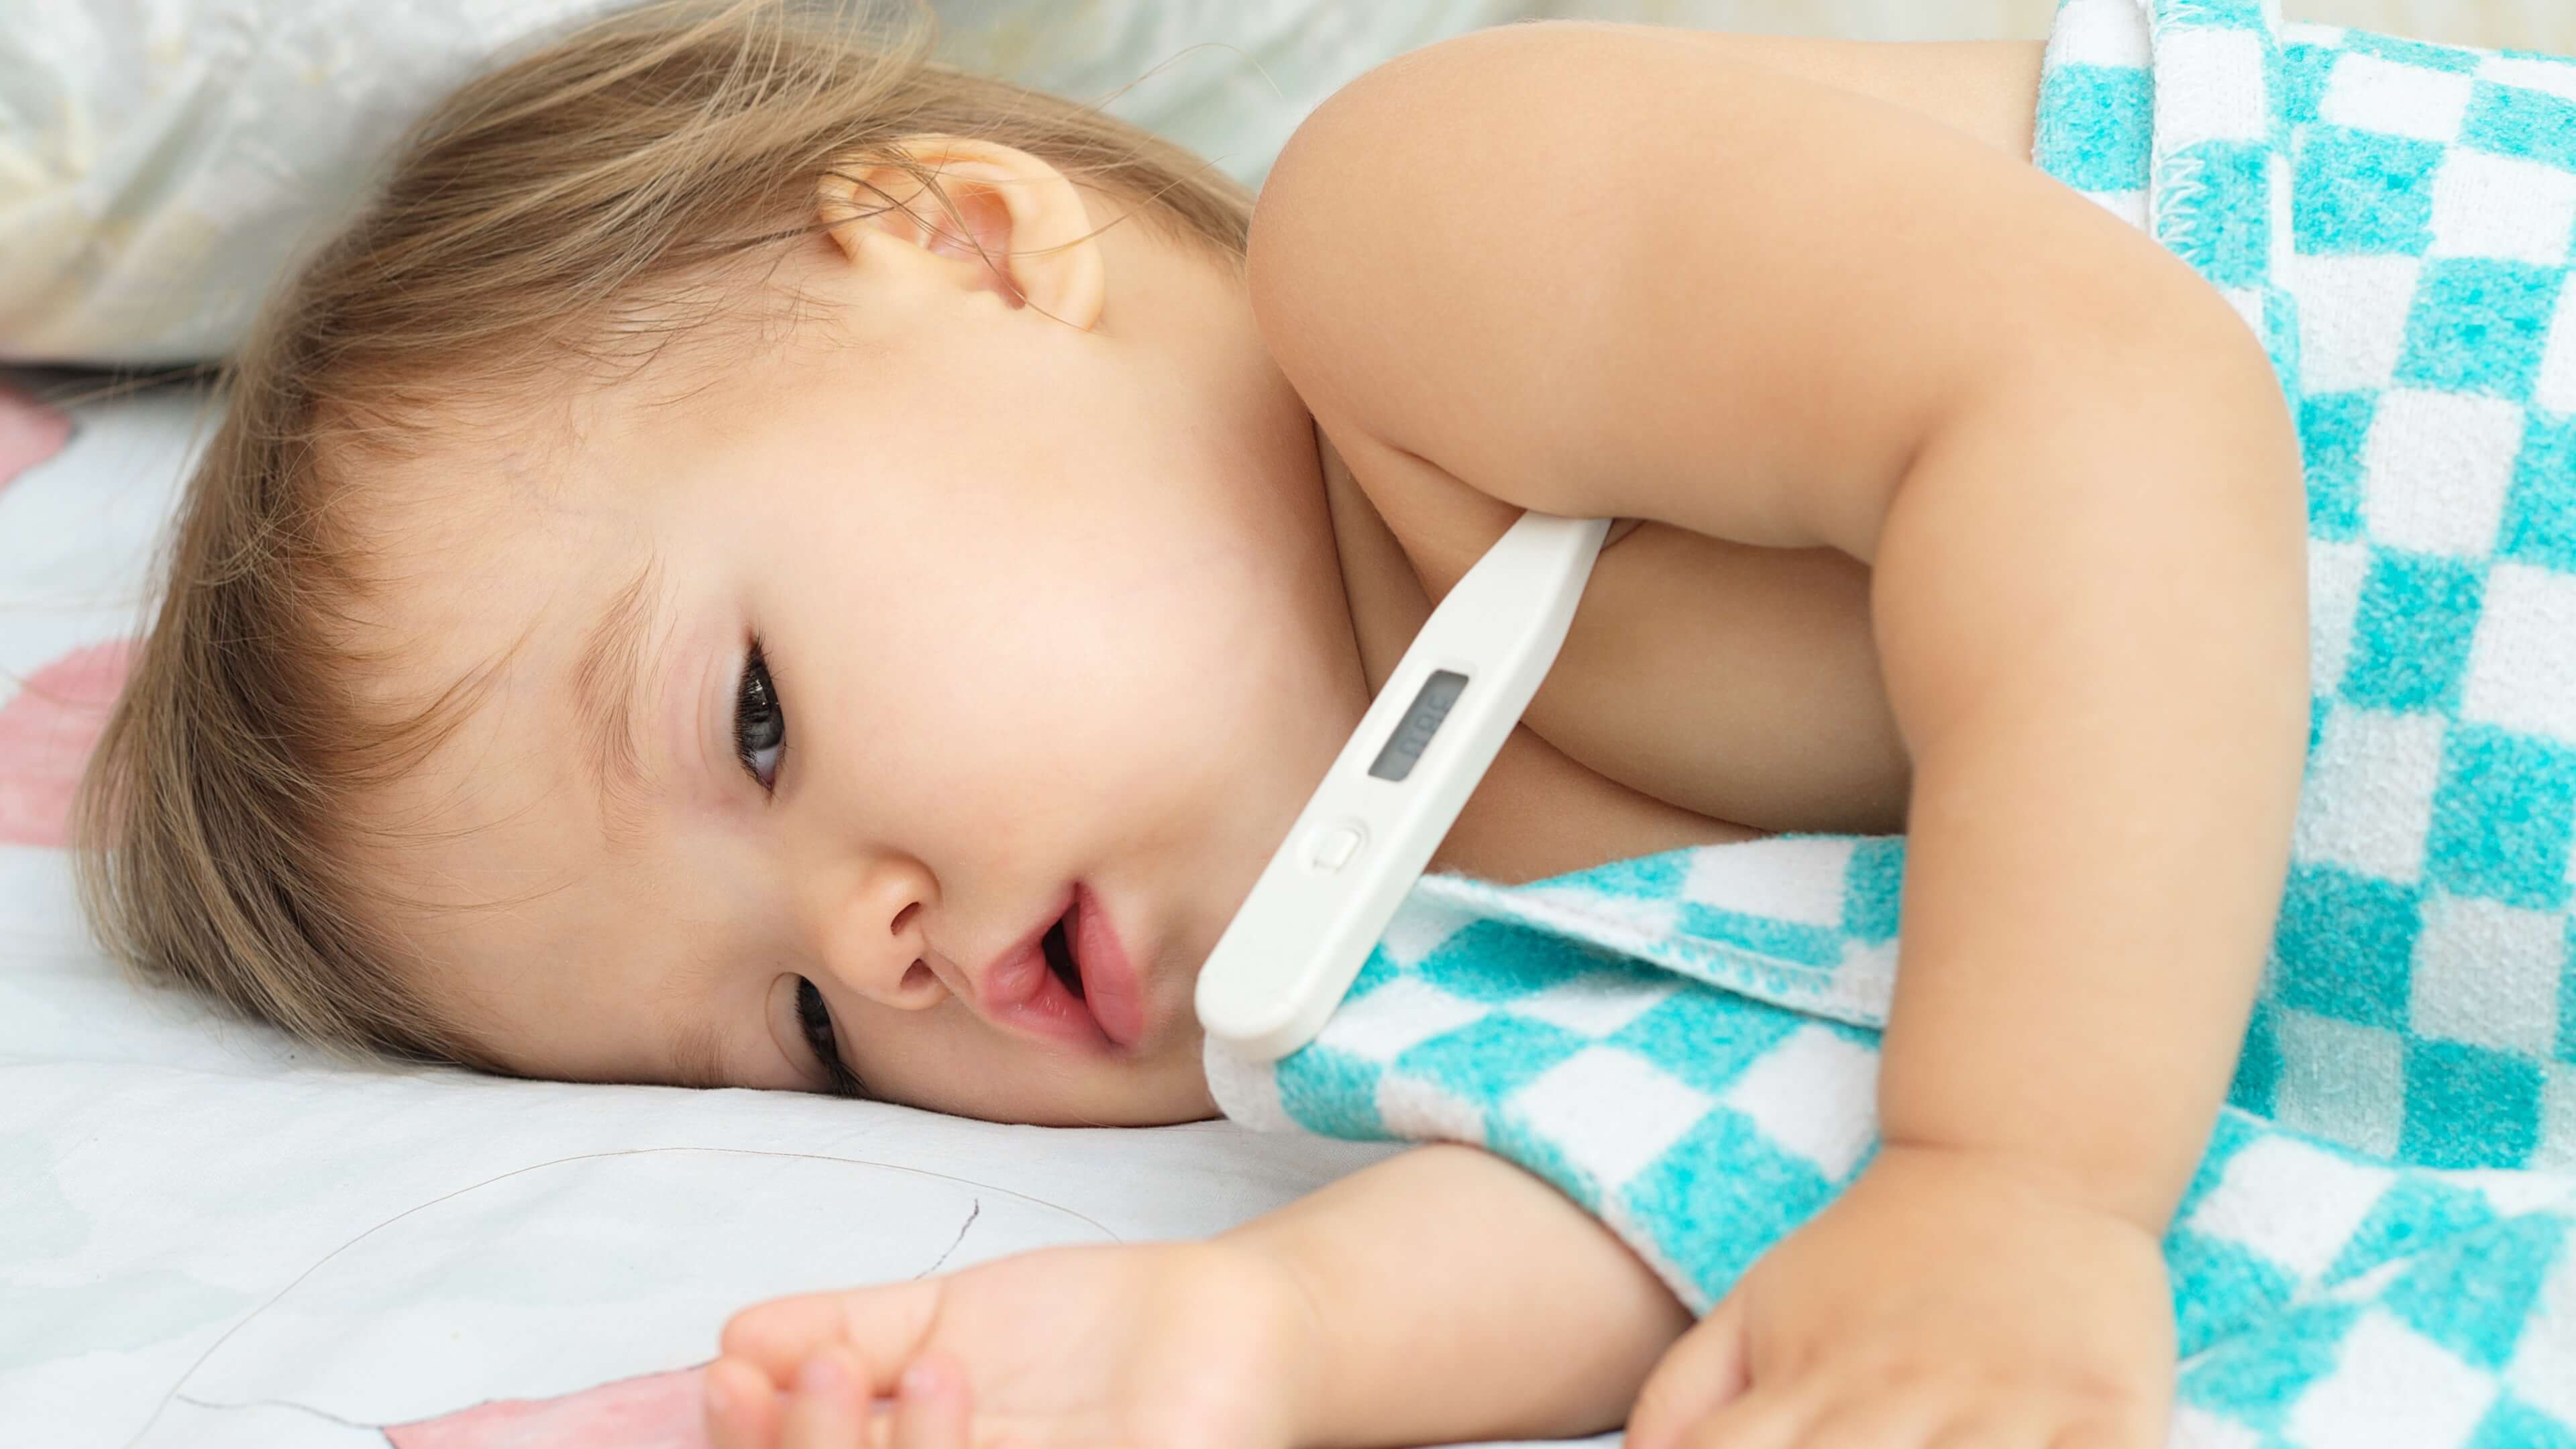 How To Tell If You Have A Fever Without A Thermometer